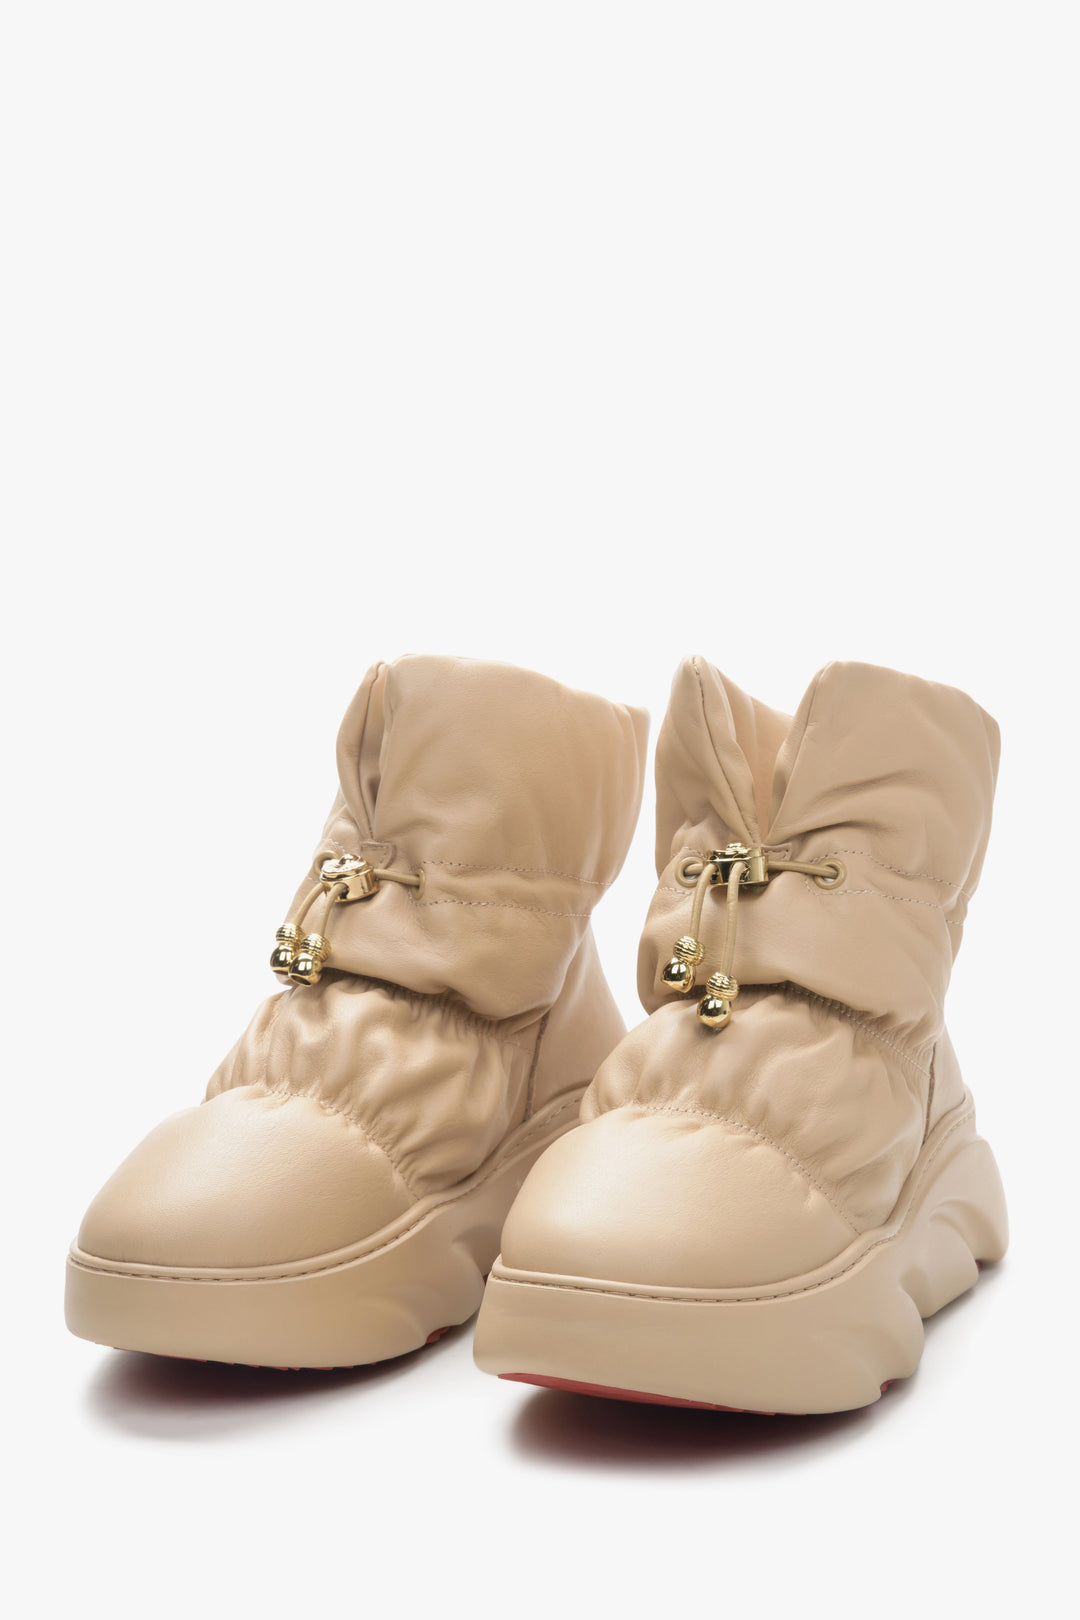 Women's beige snow boots with leather and fur by Estro - front view of the shoe.